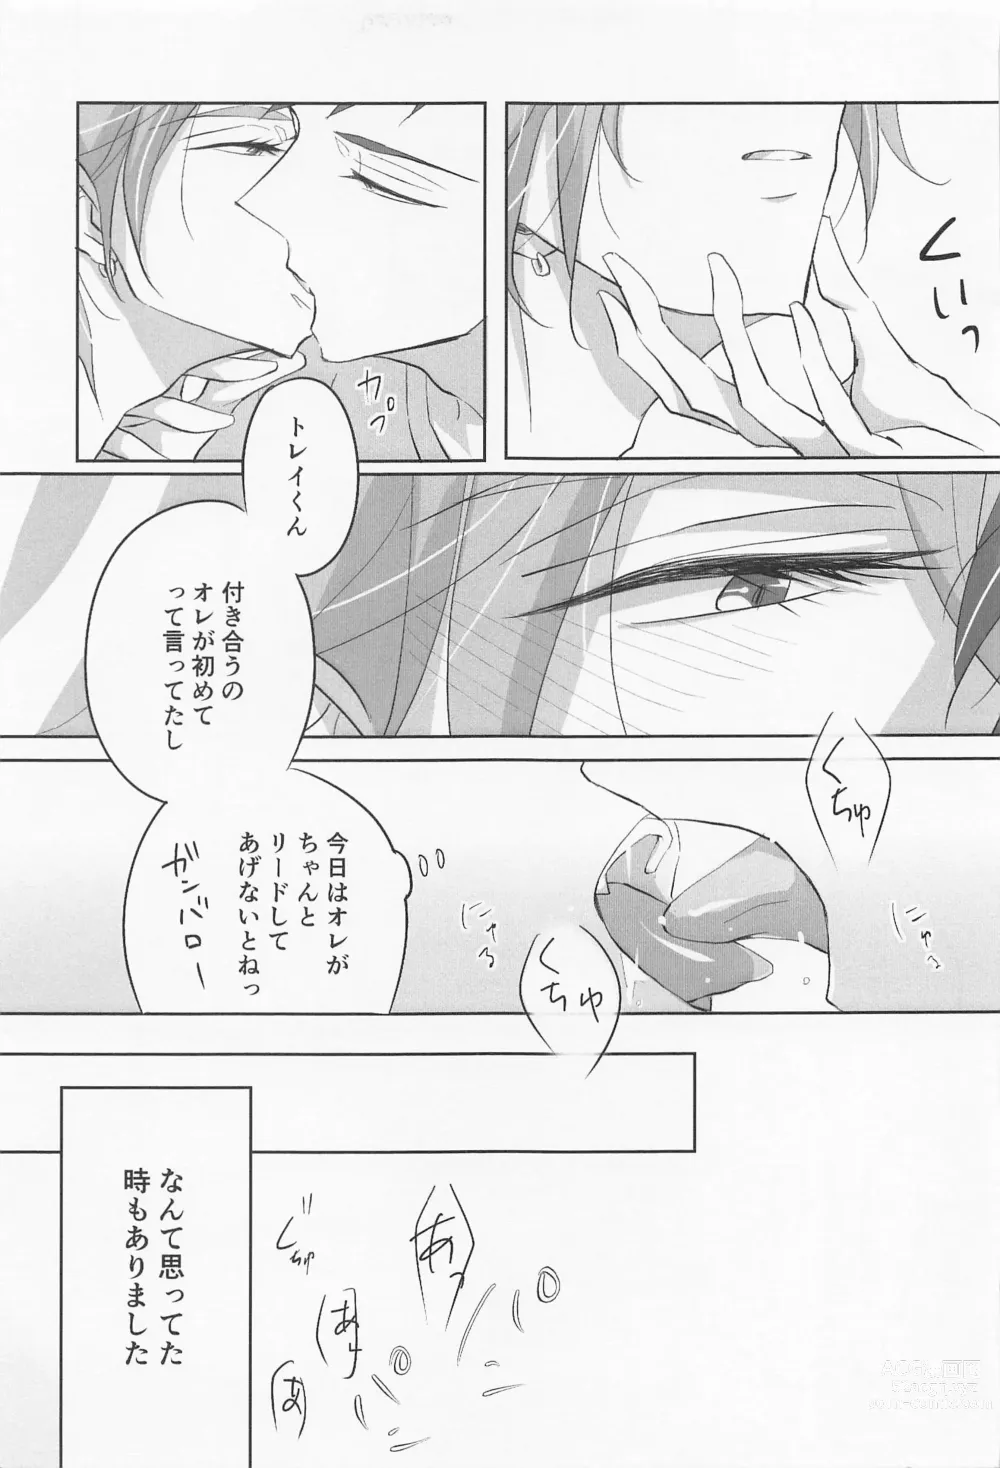 Page 46 of doujinshi My heart dedicated to you